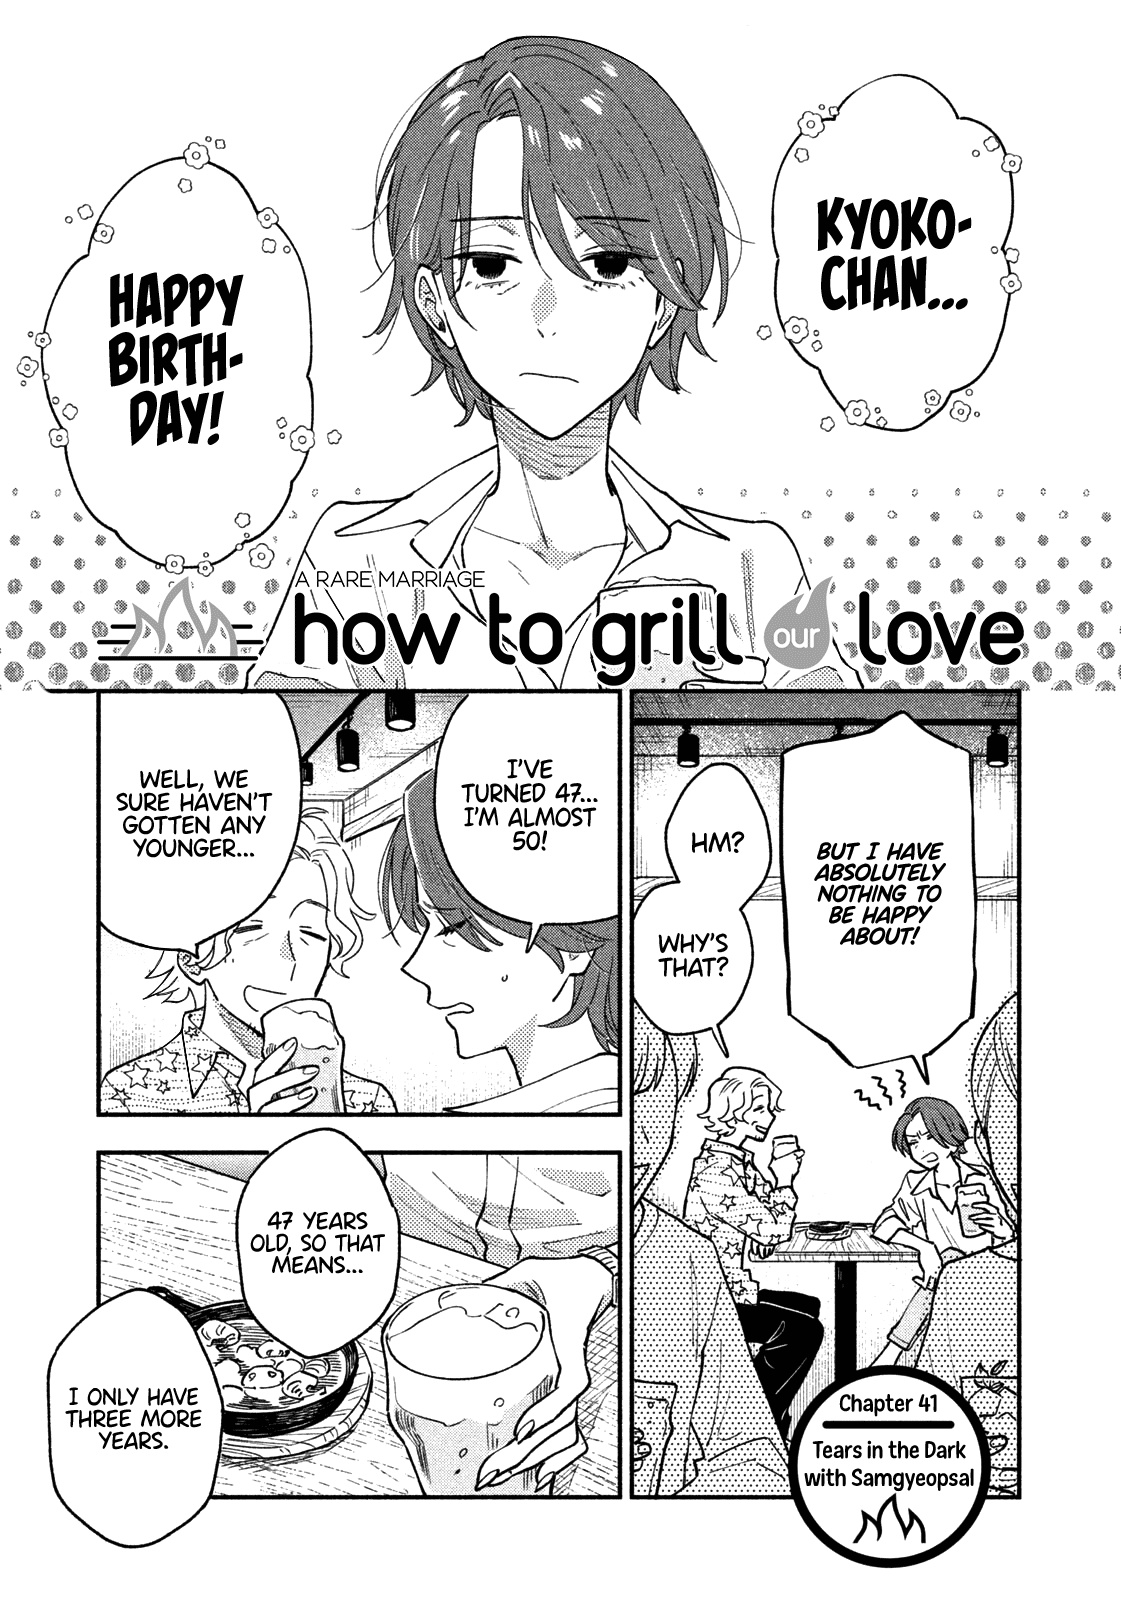 A Rare Marriage: How To Grill Our Love - Page 2